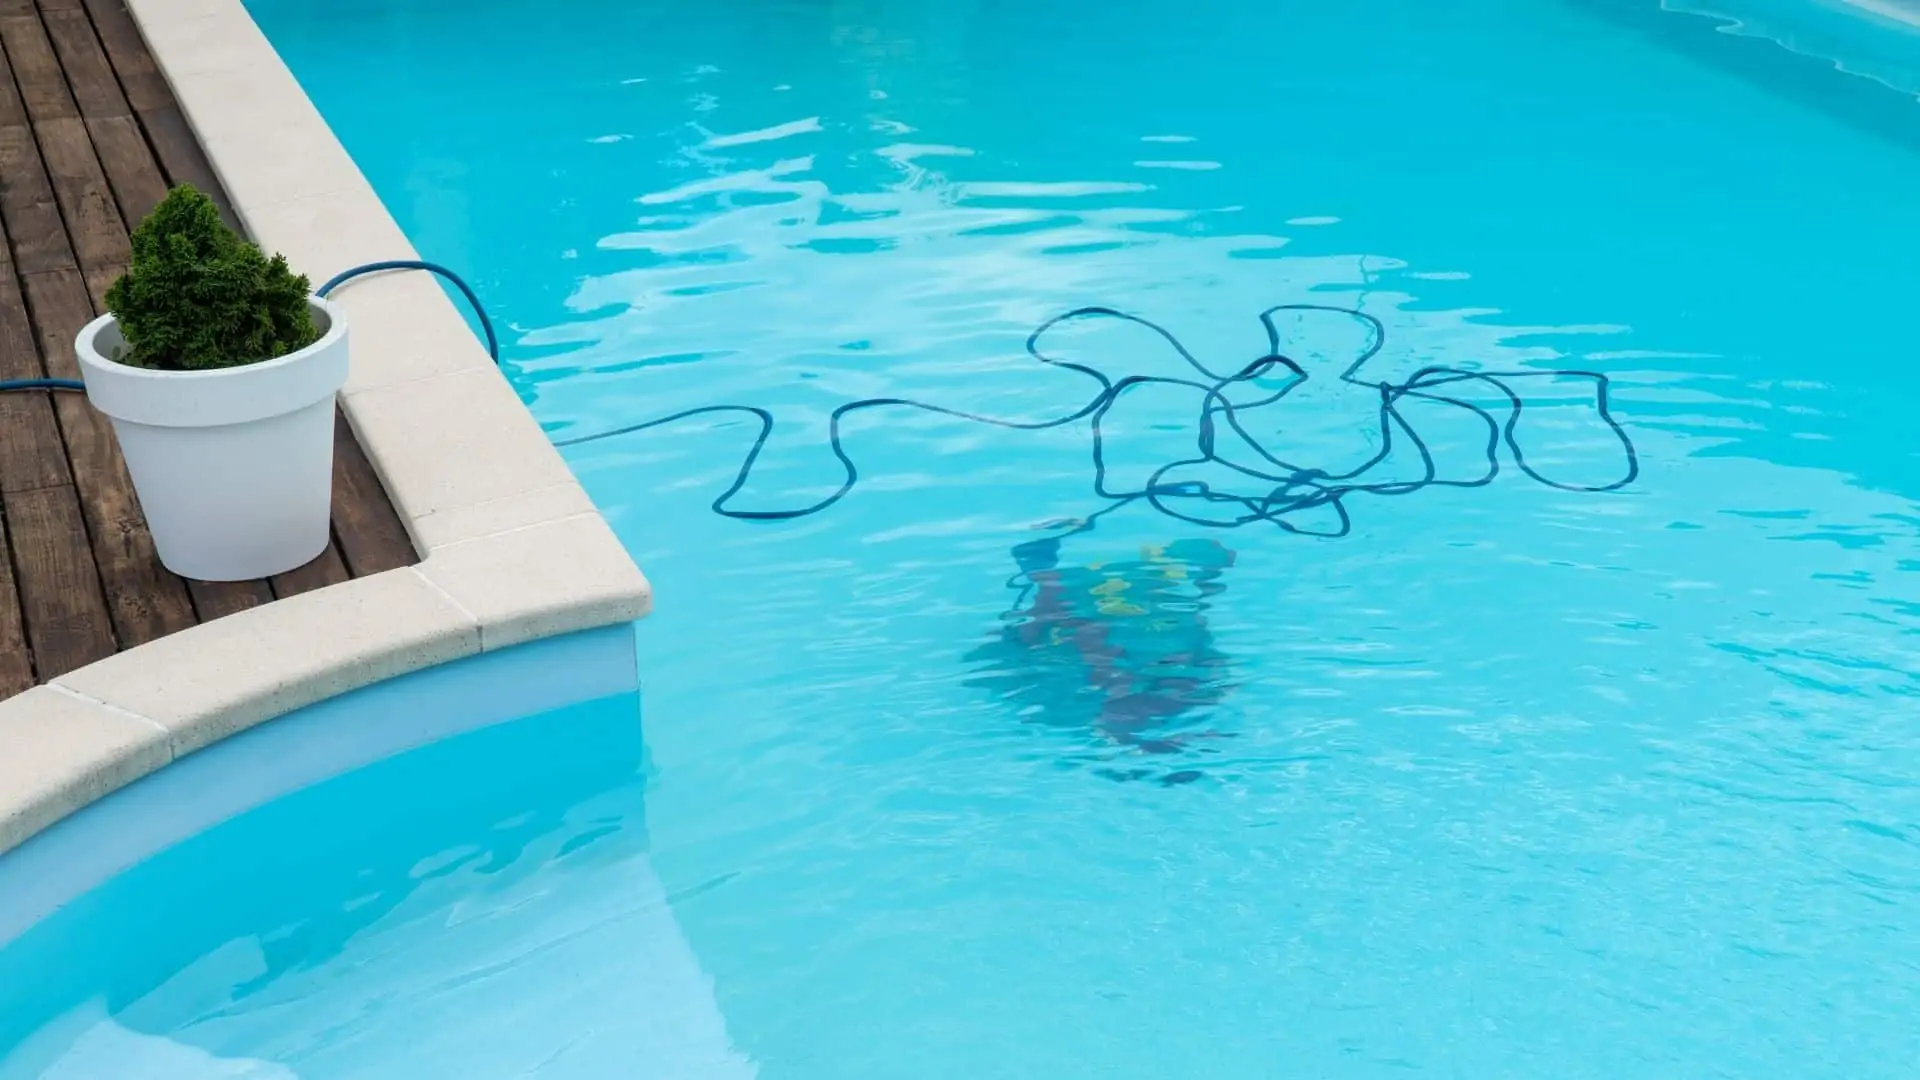 Can You Leave a Robotic Pool Cleaner in the Pool?